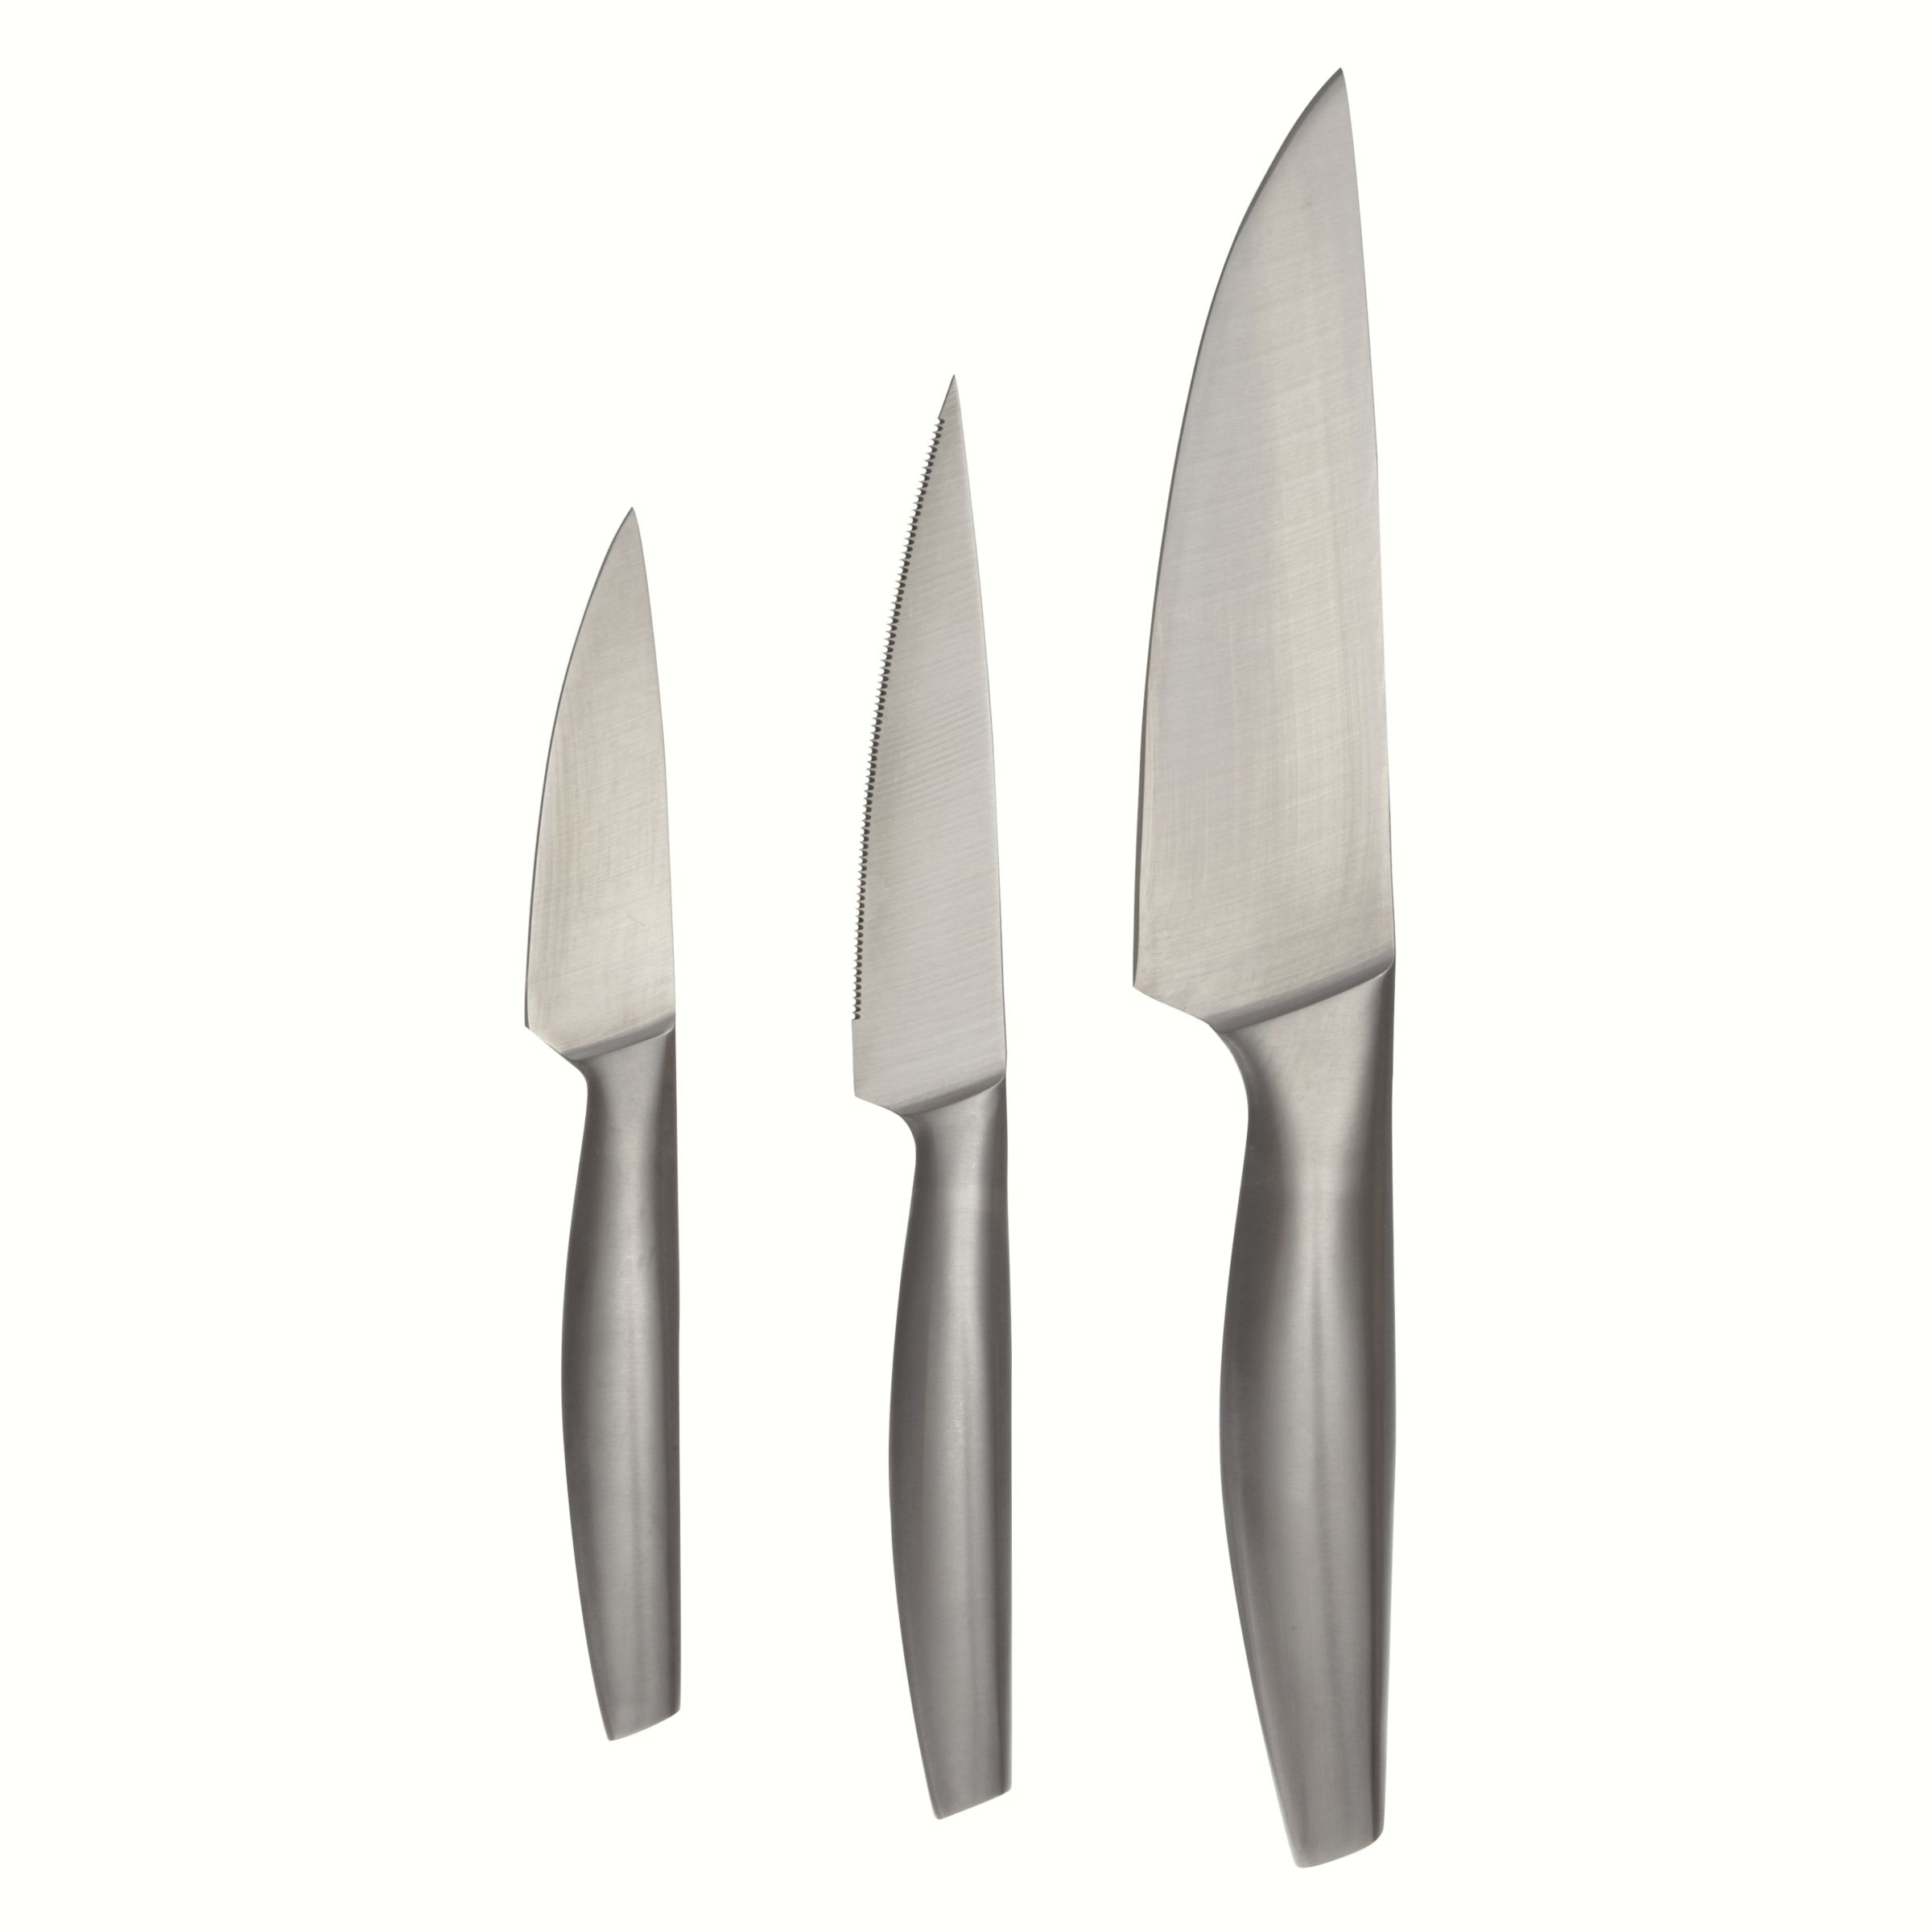 House by John Lewis Stainless Steel Knife Set, 3 Pieces